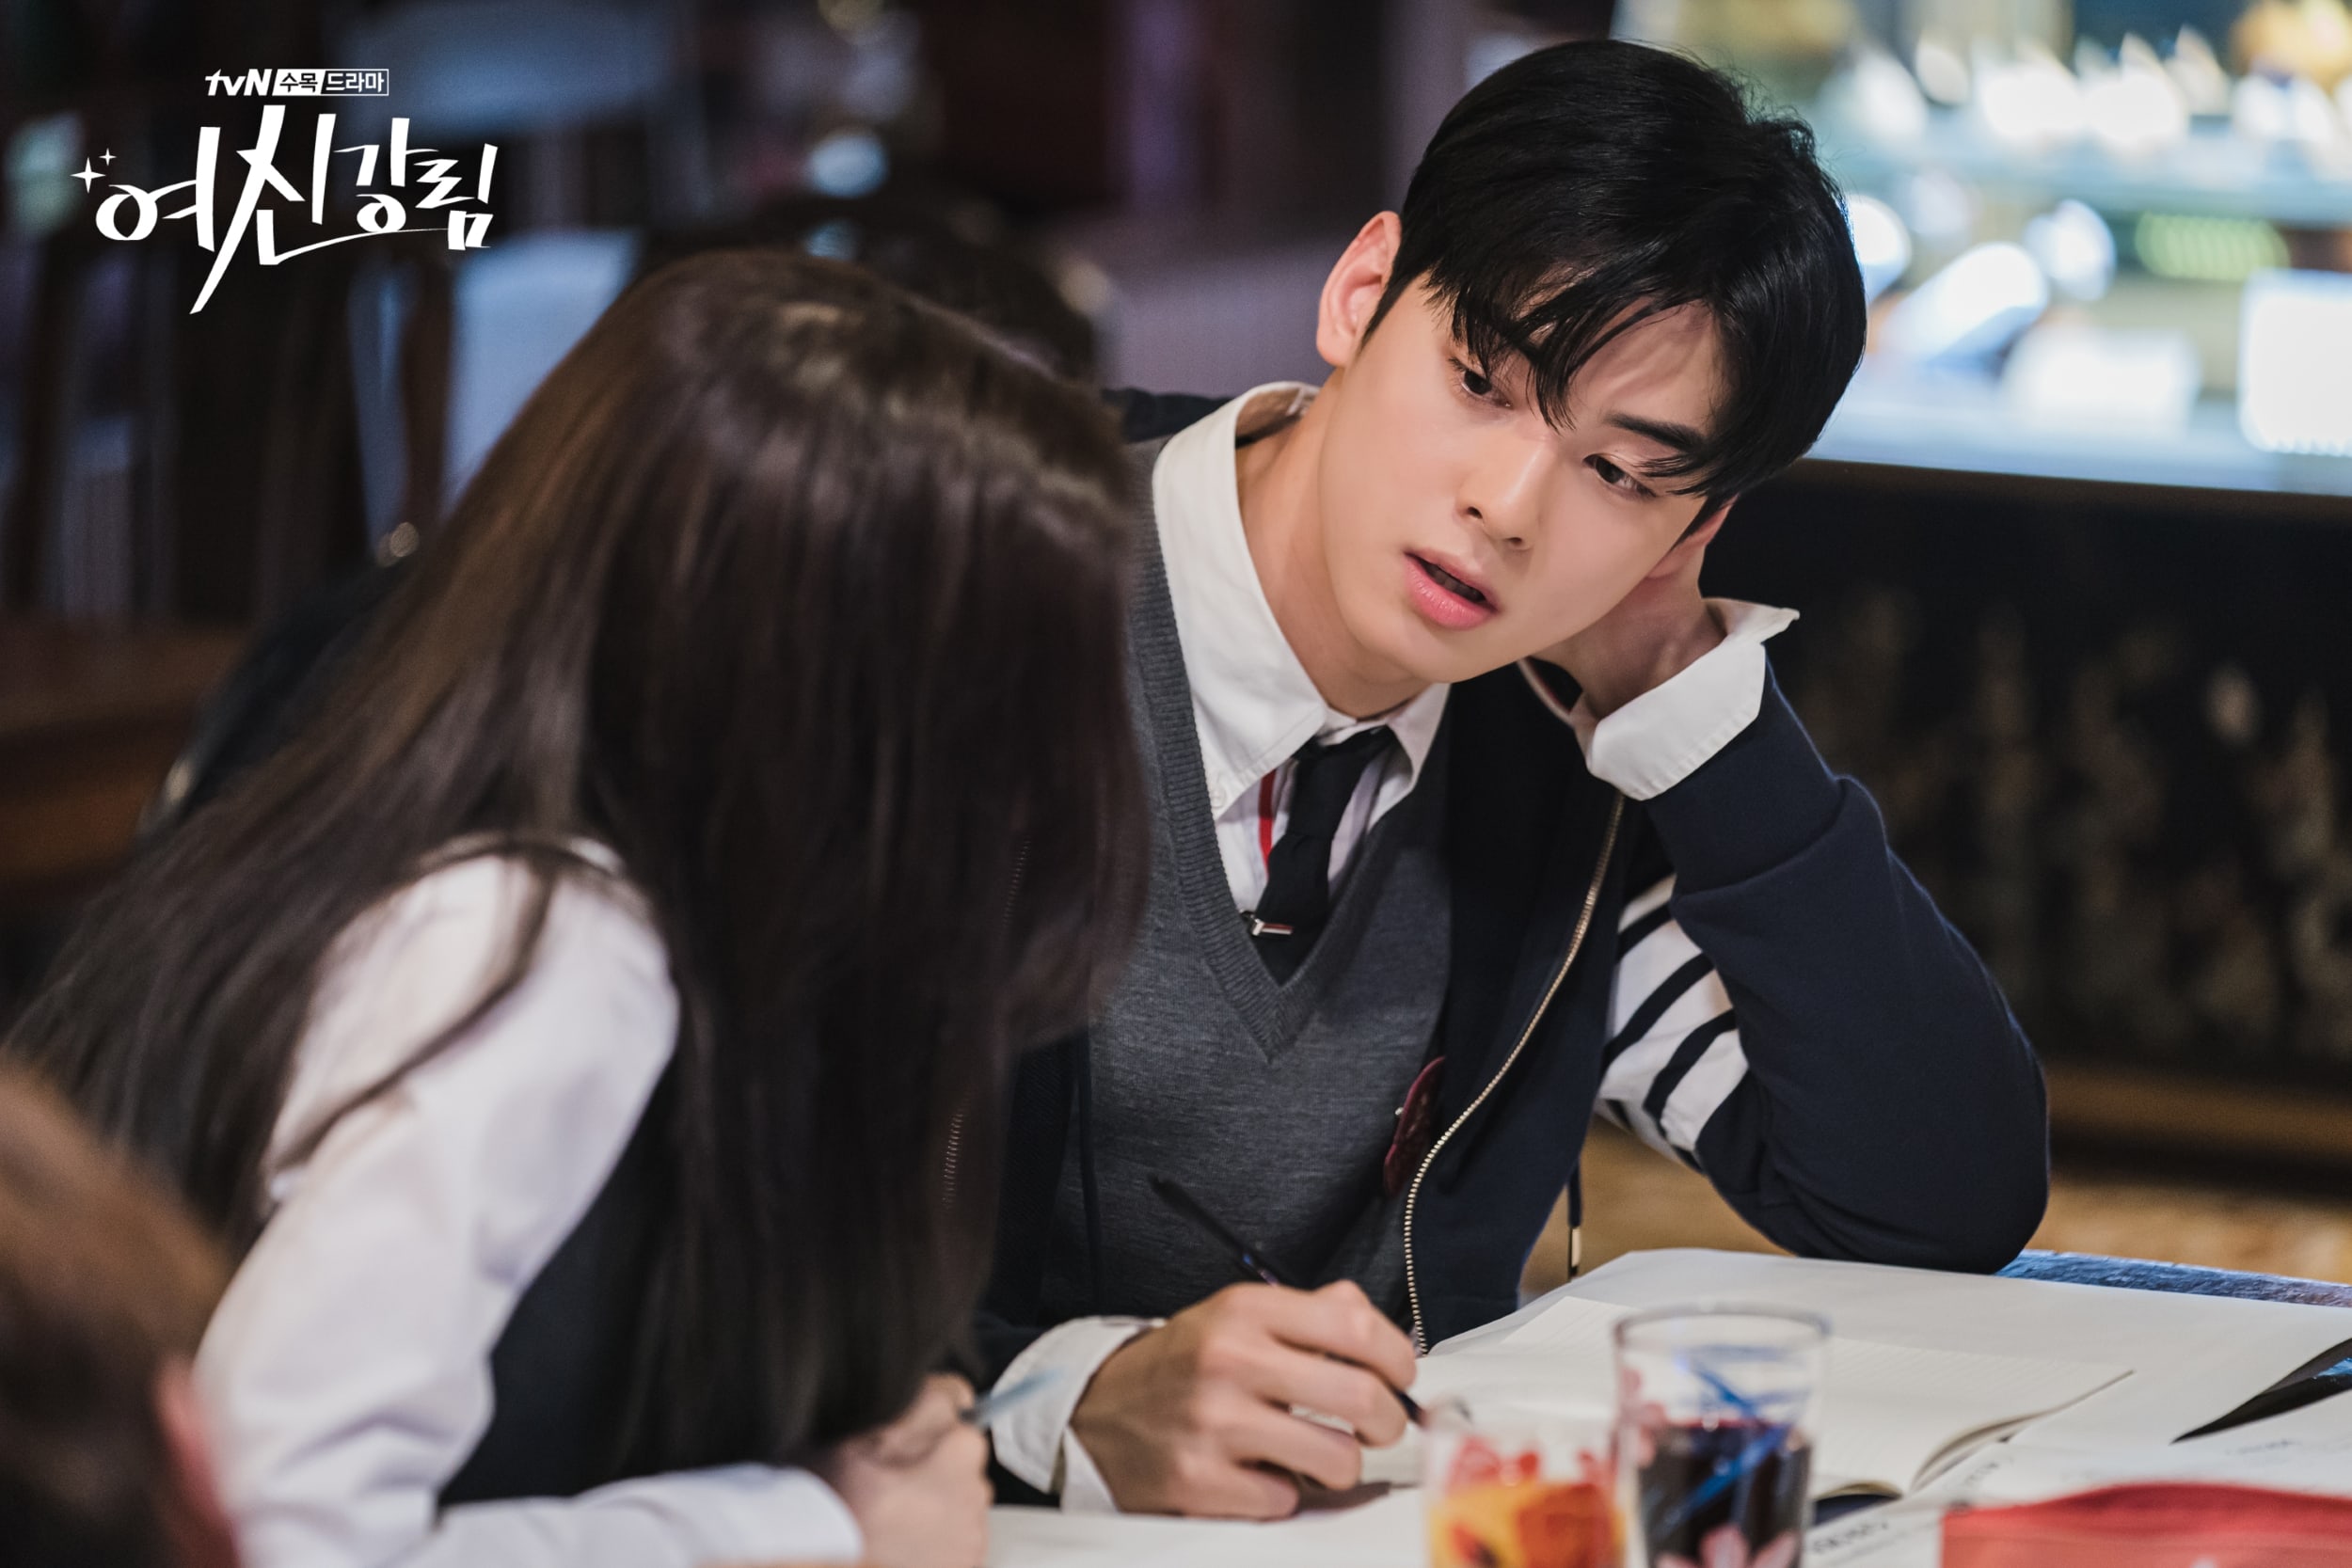 Moon Ga Young And ASTRO’s Cha Eun Woo Gaze At Each Other All The Time